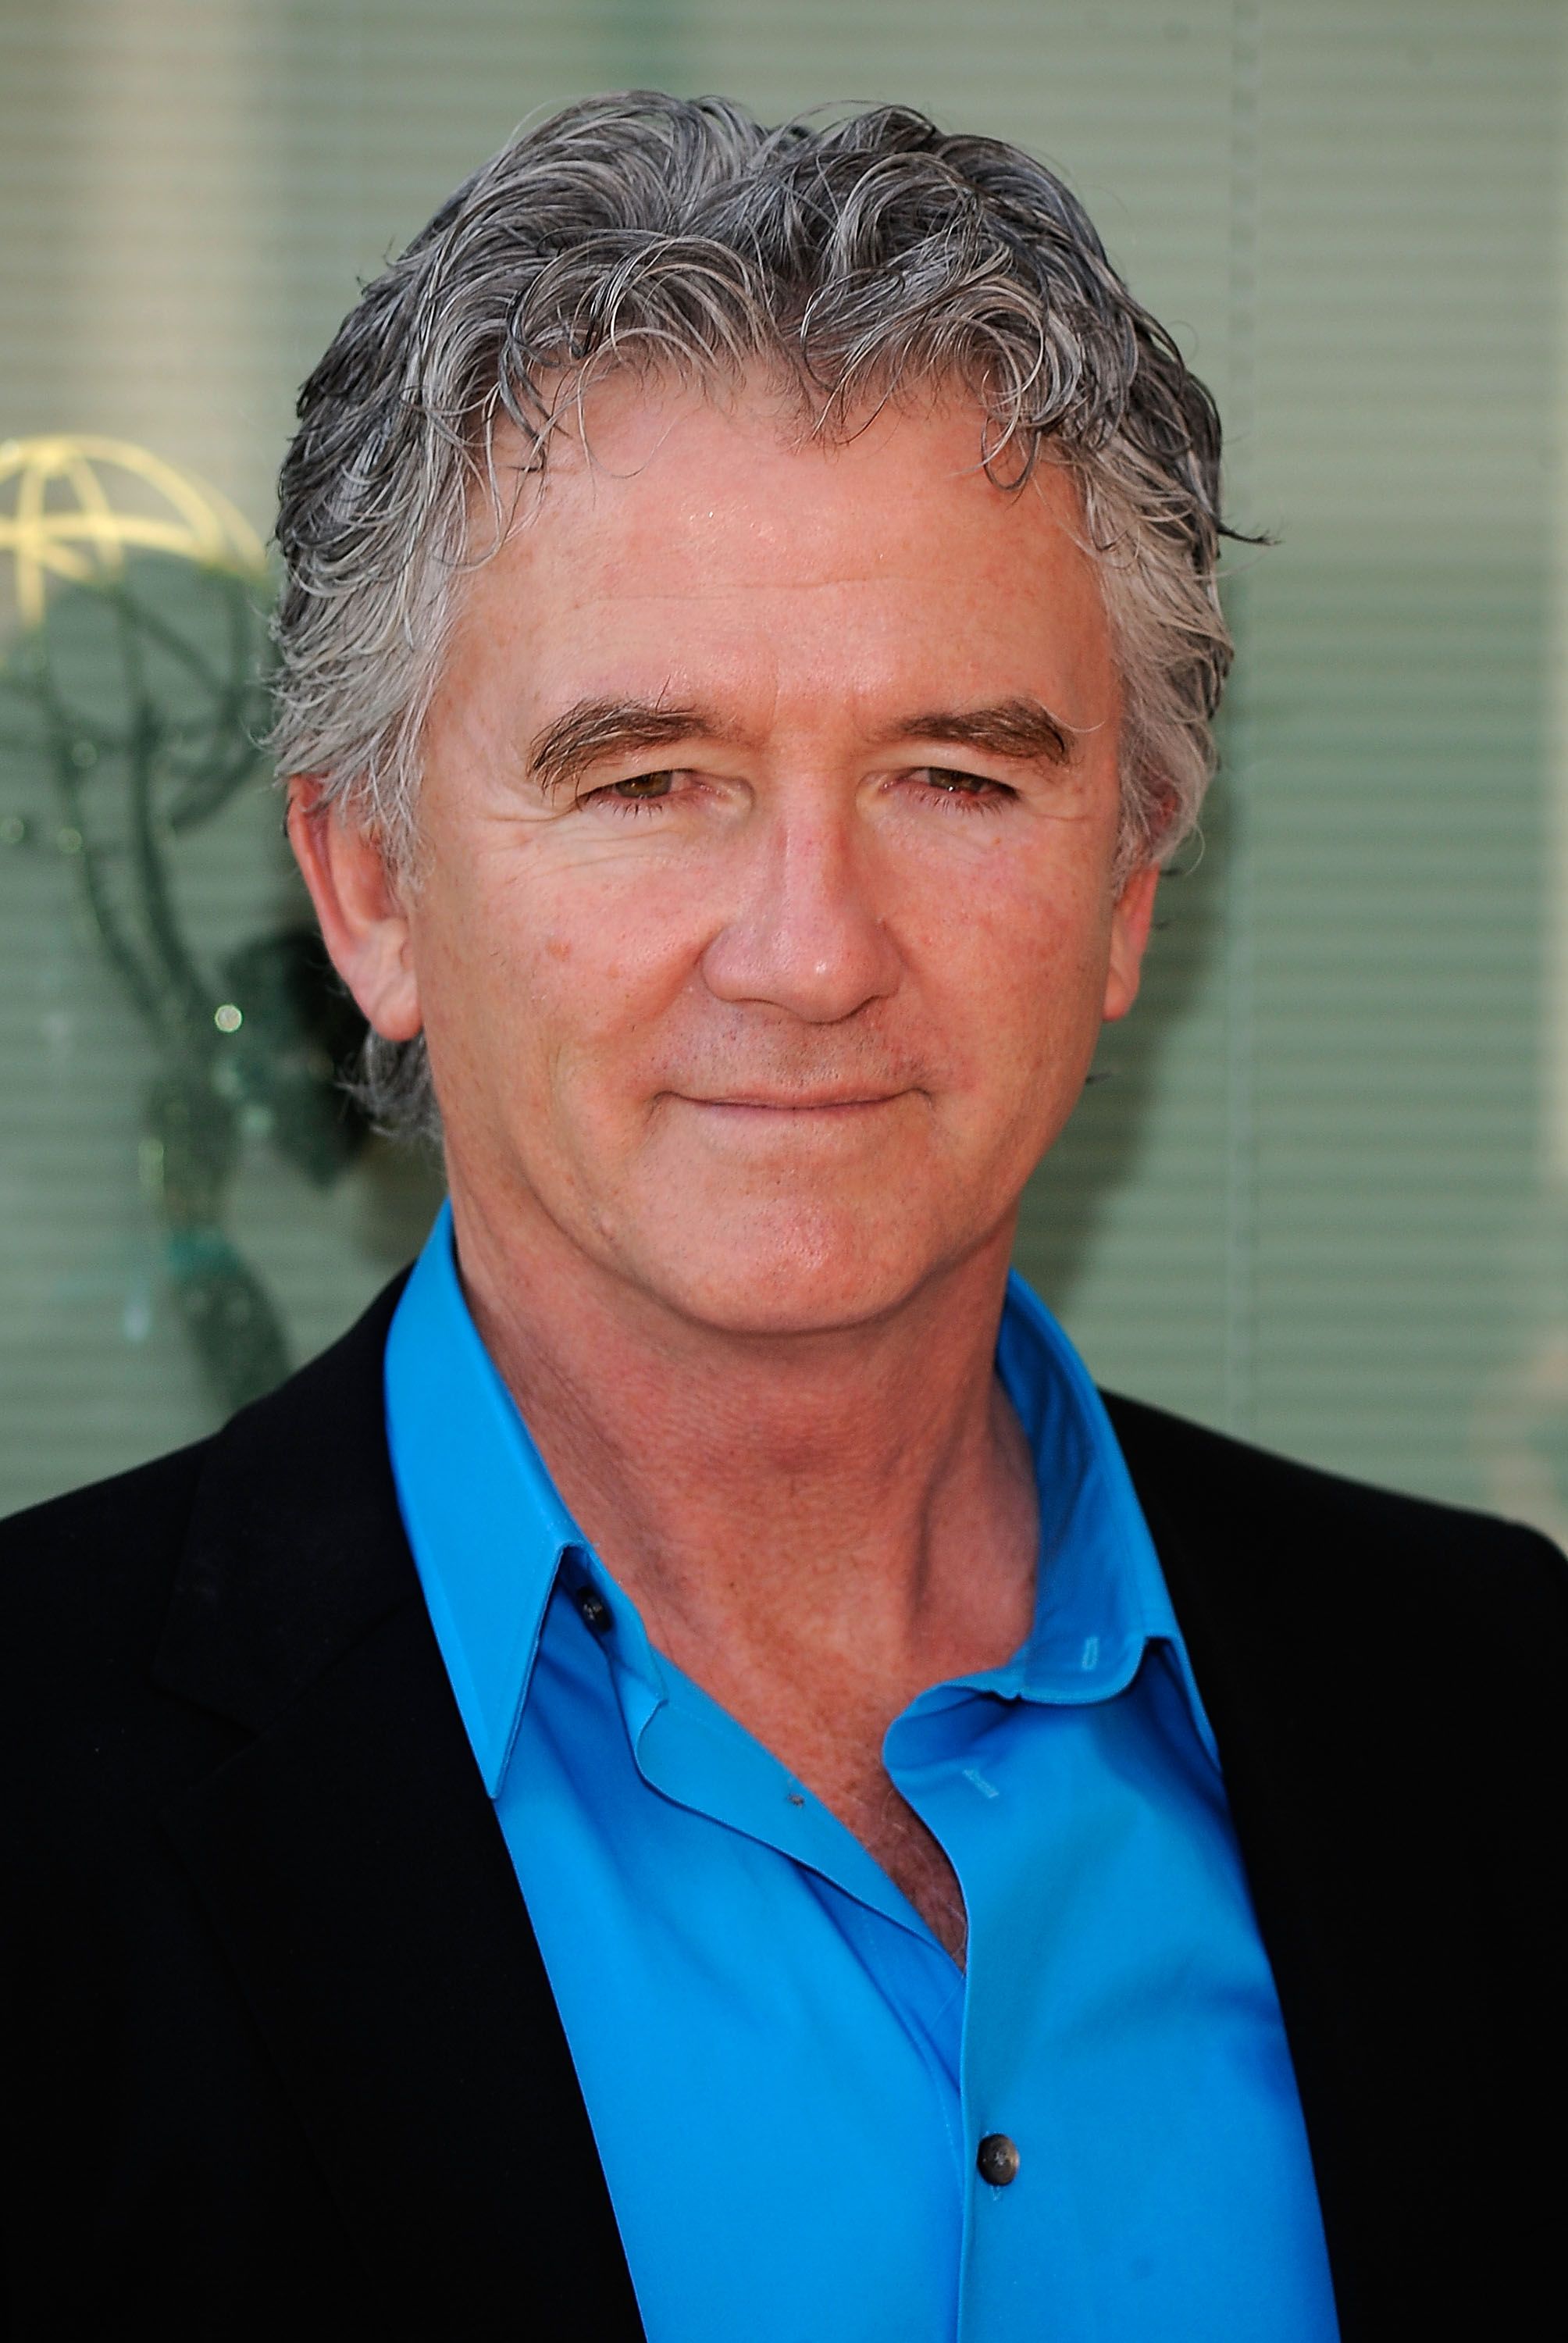 Patrick Duffy at the Academy of Television Arts and Sciences in Hollywood on June 18, 2009.┃Source: Getty Images